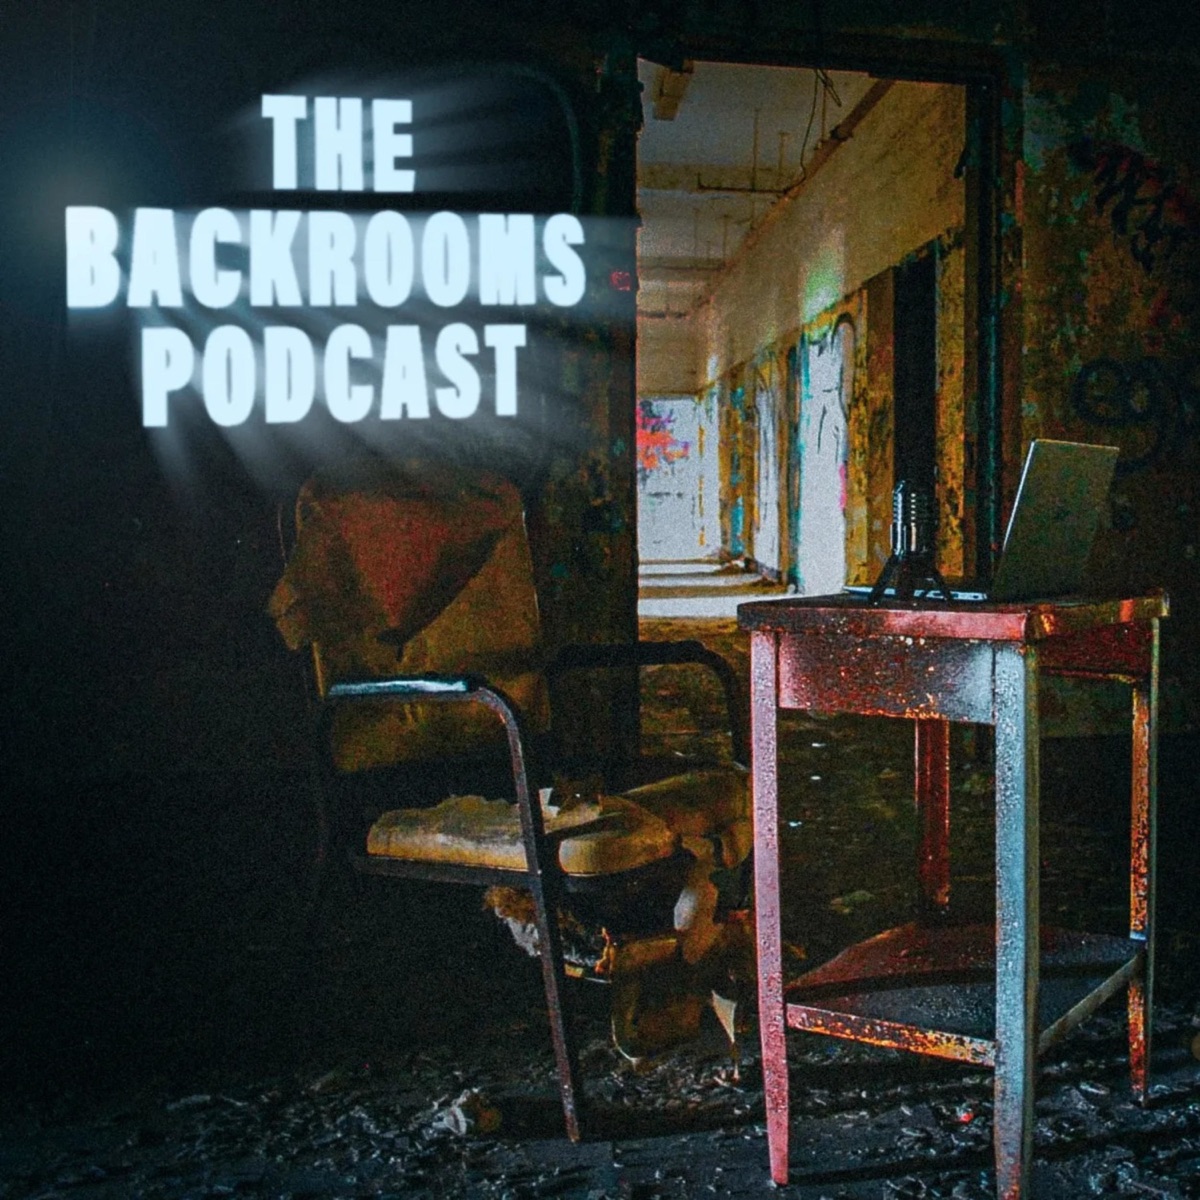 The Backrooms - You Have Been Here Before Minecraft Map